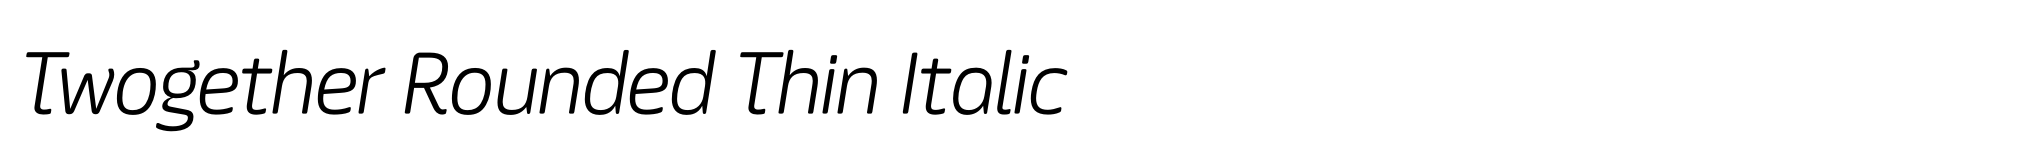 Twogether Rounded Thin Italic image